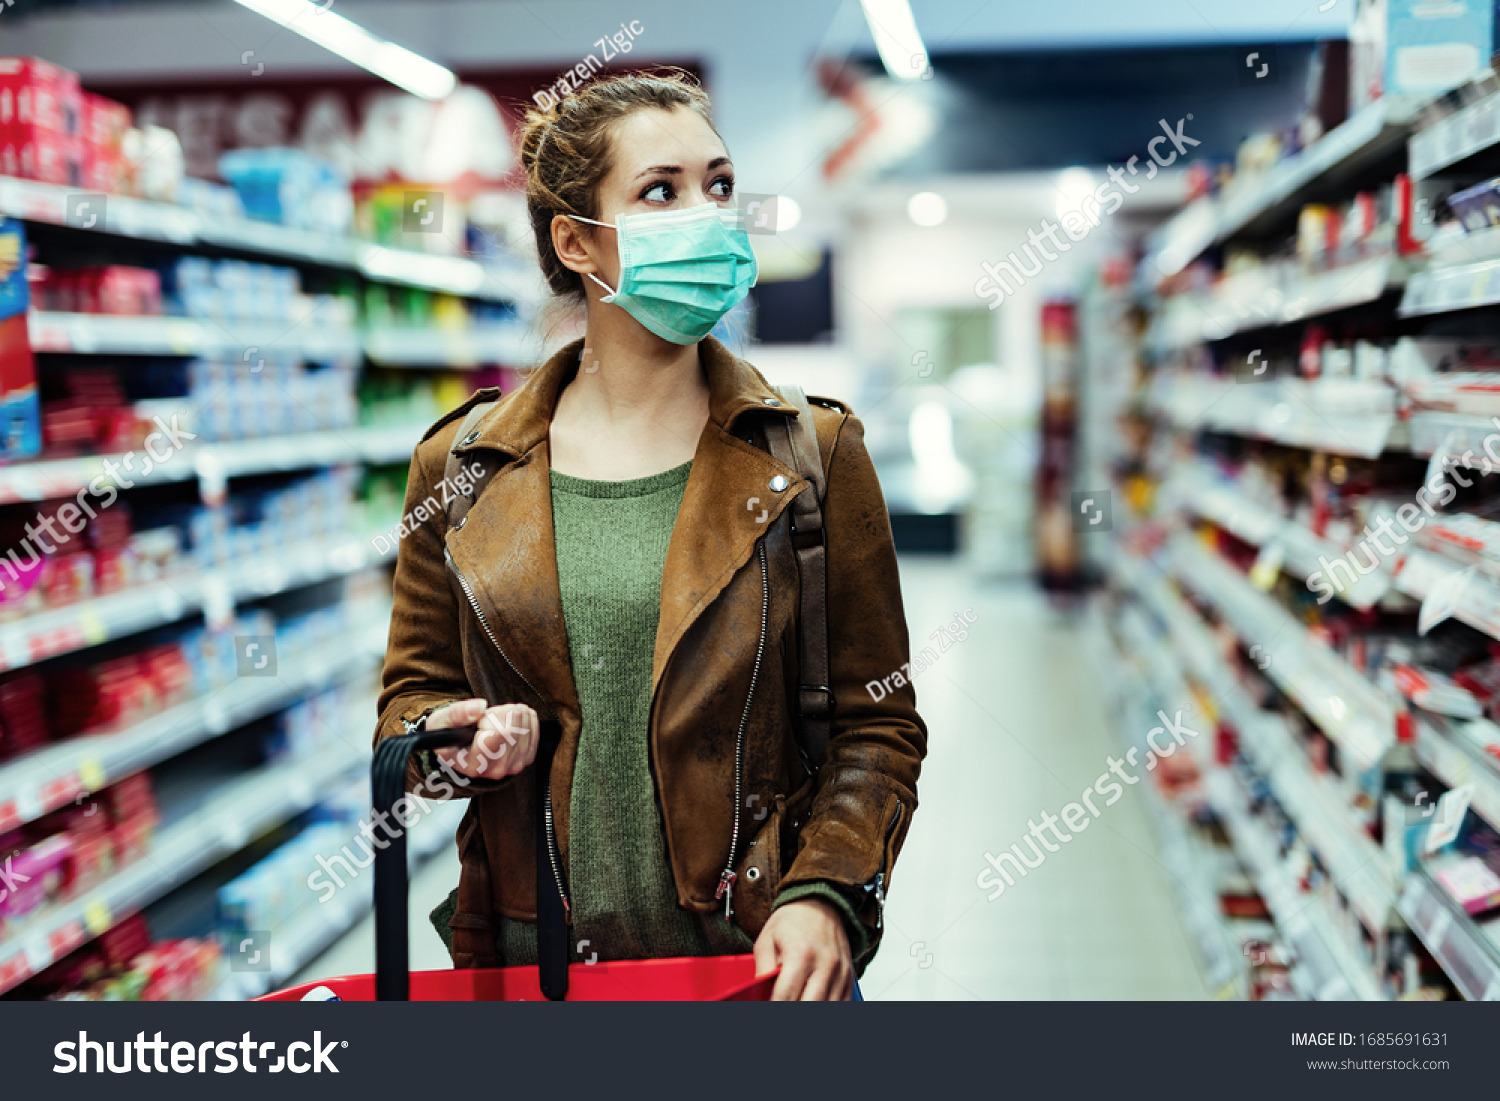 Young woman with face mask walking through grocery store during COVID-19 pandemic.  #1685691631